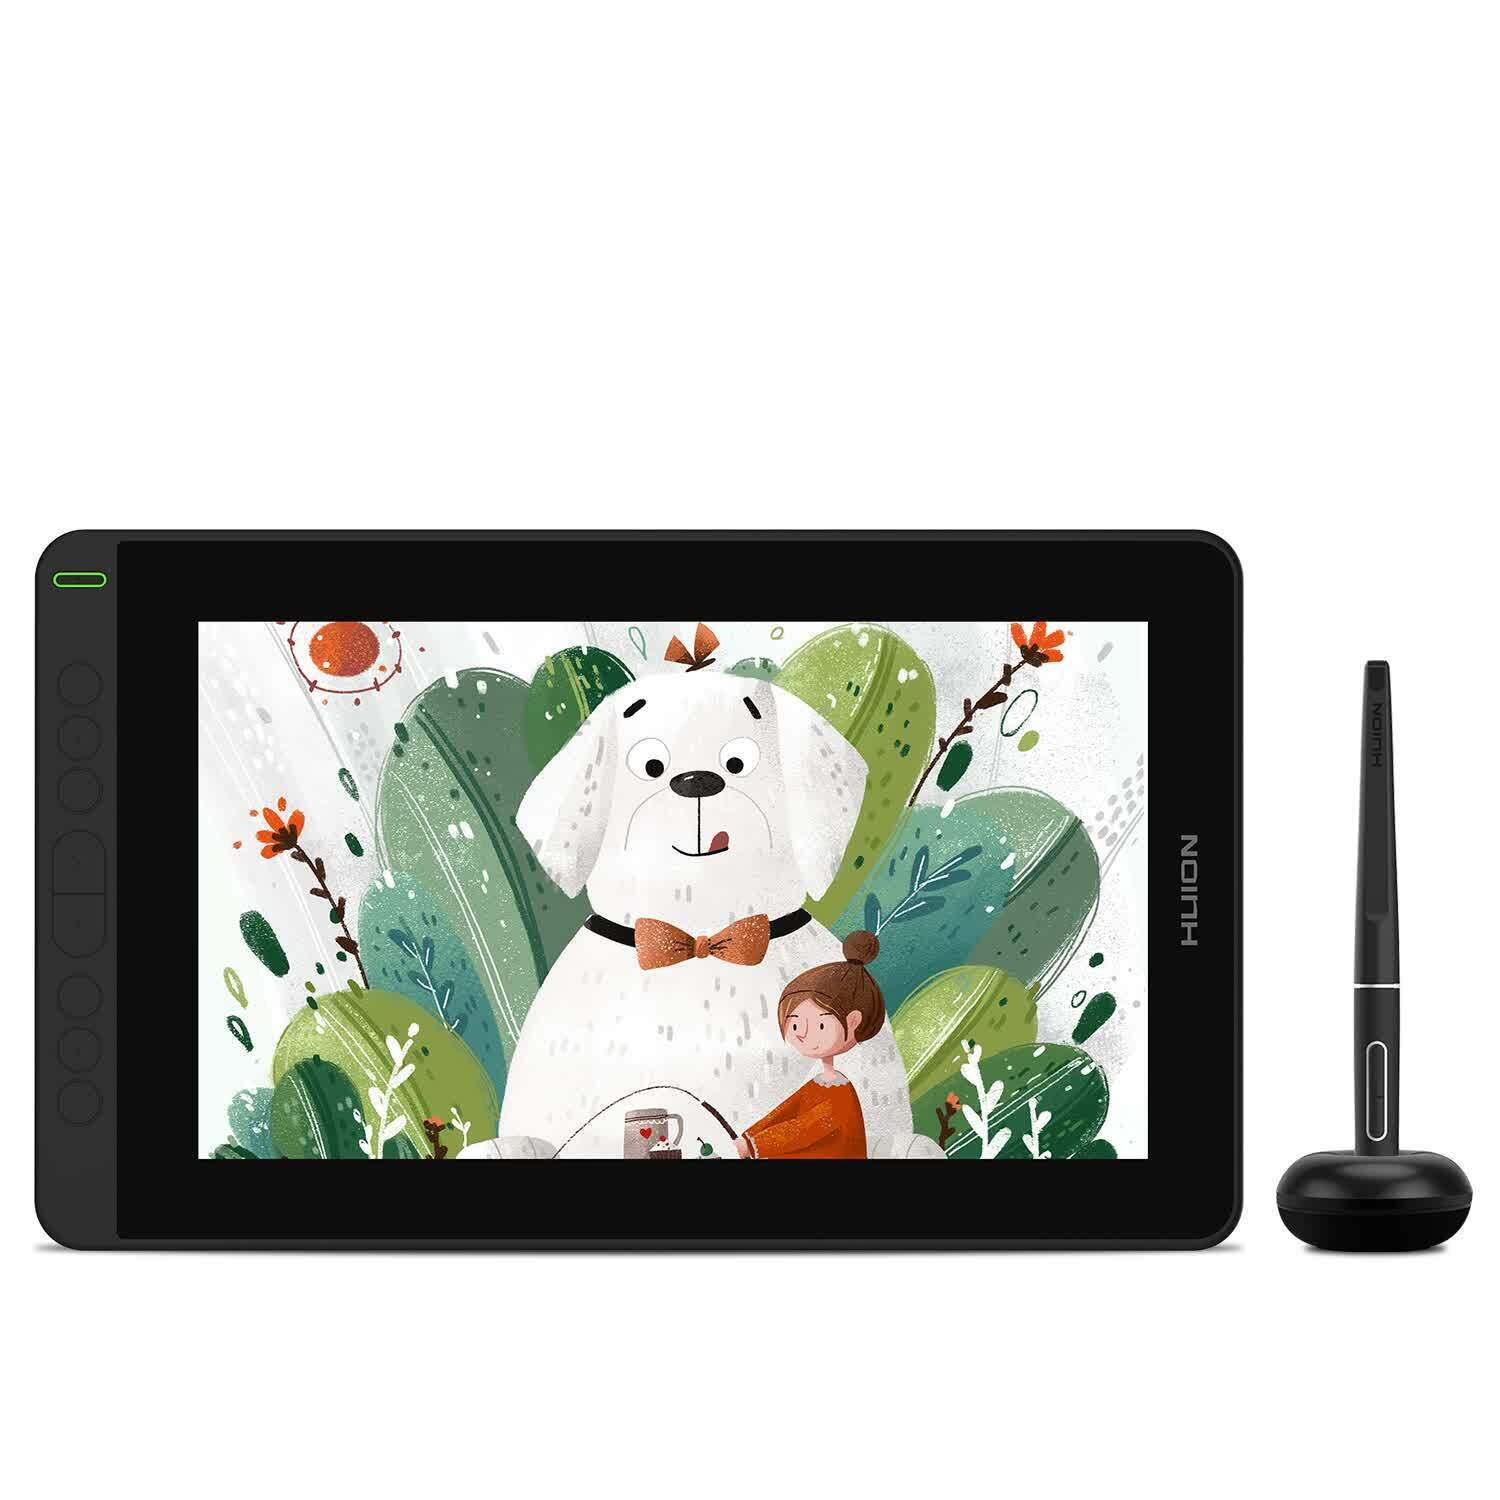 Refurbished HUION Kamvas 12 11.6inch Graphics Drawing Tablet Pen Display Android